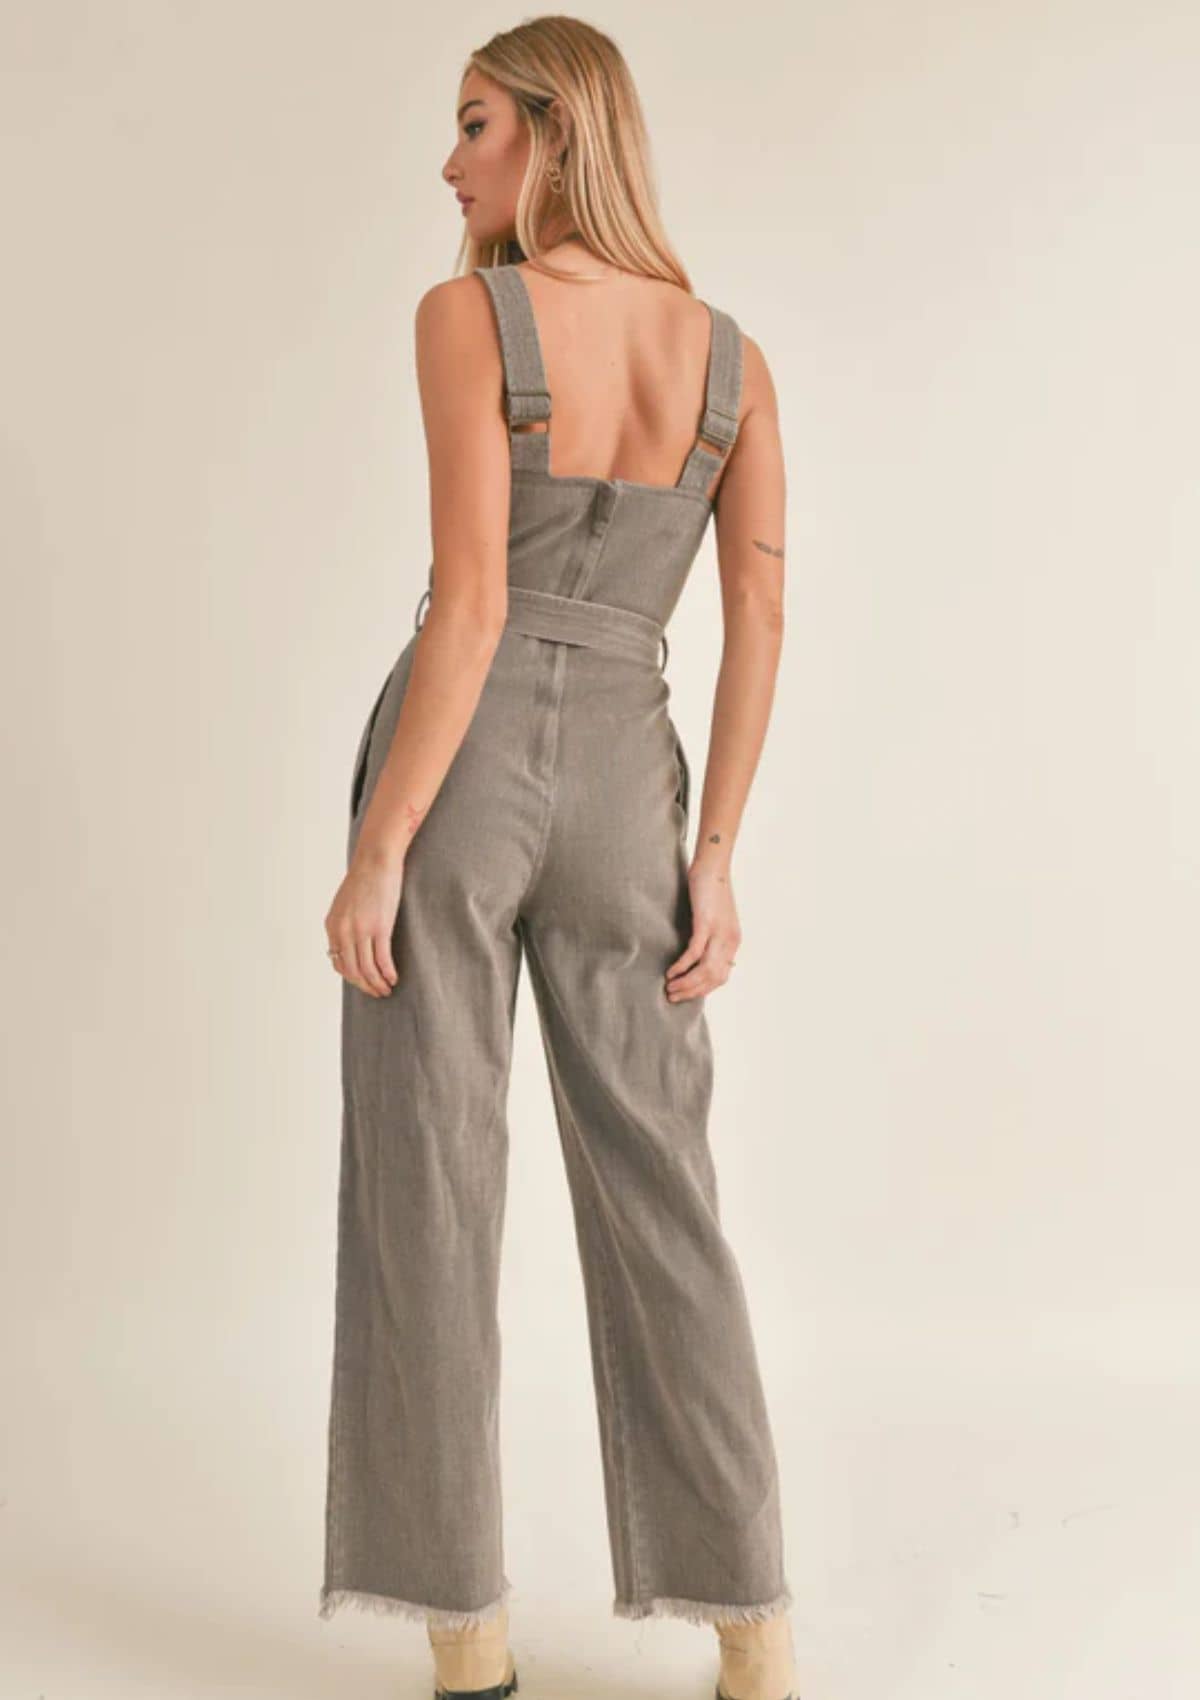 Gia Belted Washed Denim Overall -Sage the Label- Ruby Jane-